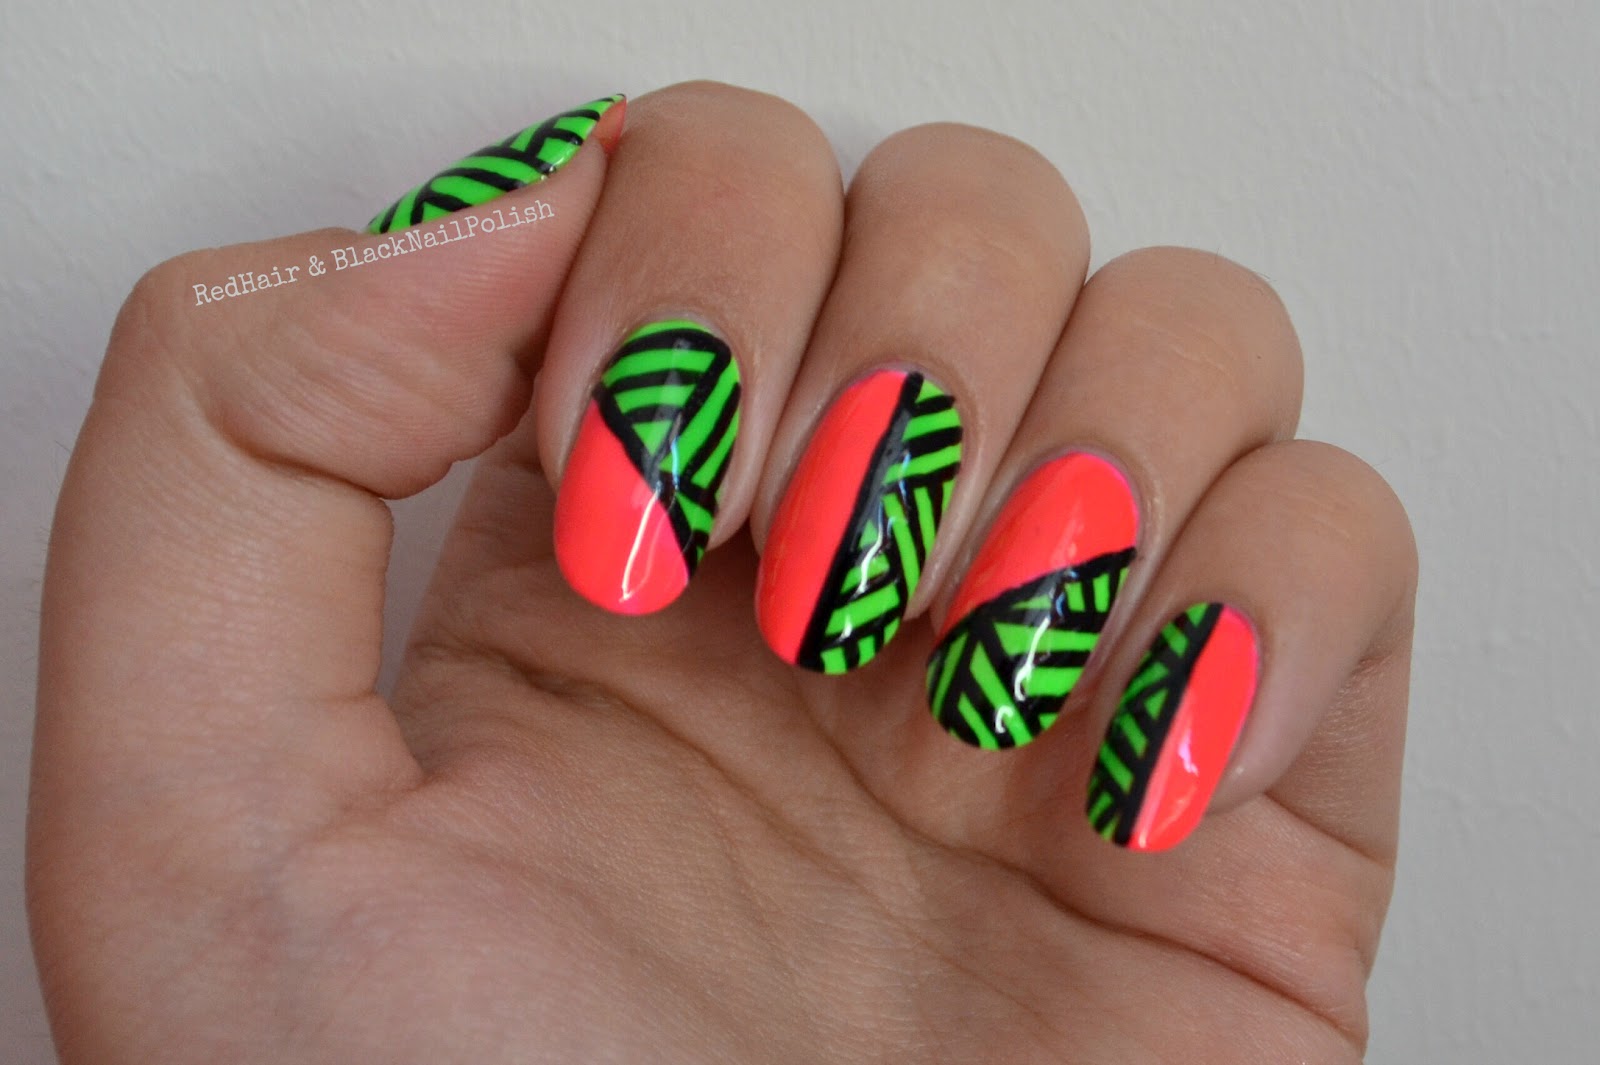 10 Neon Nail Art Designs That Will Brighten Up Your Day - wide 8